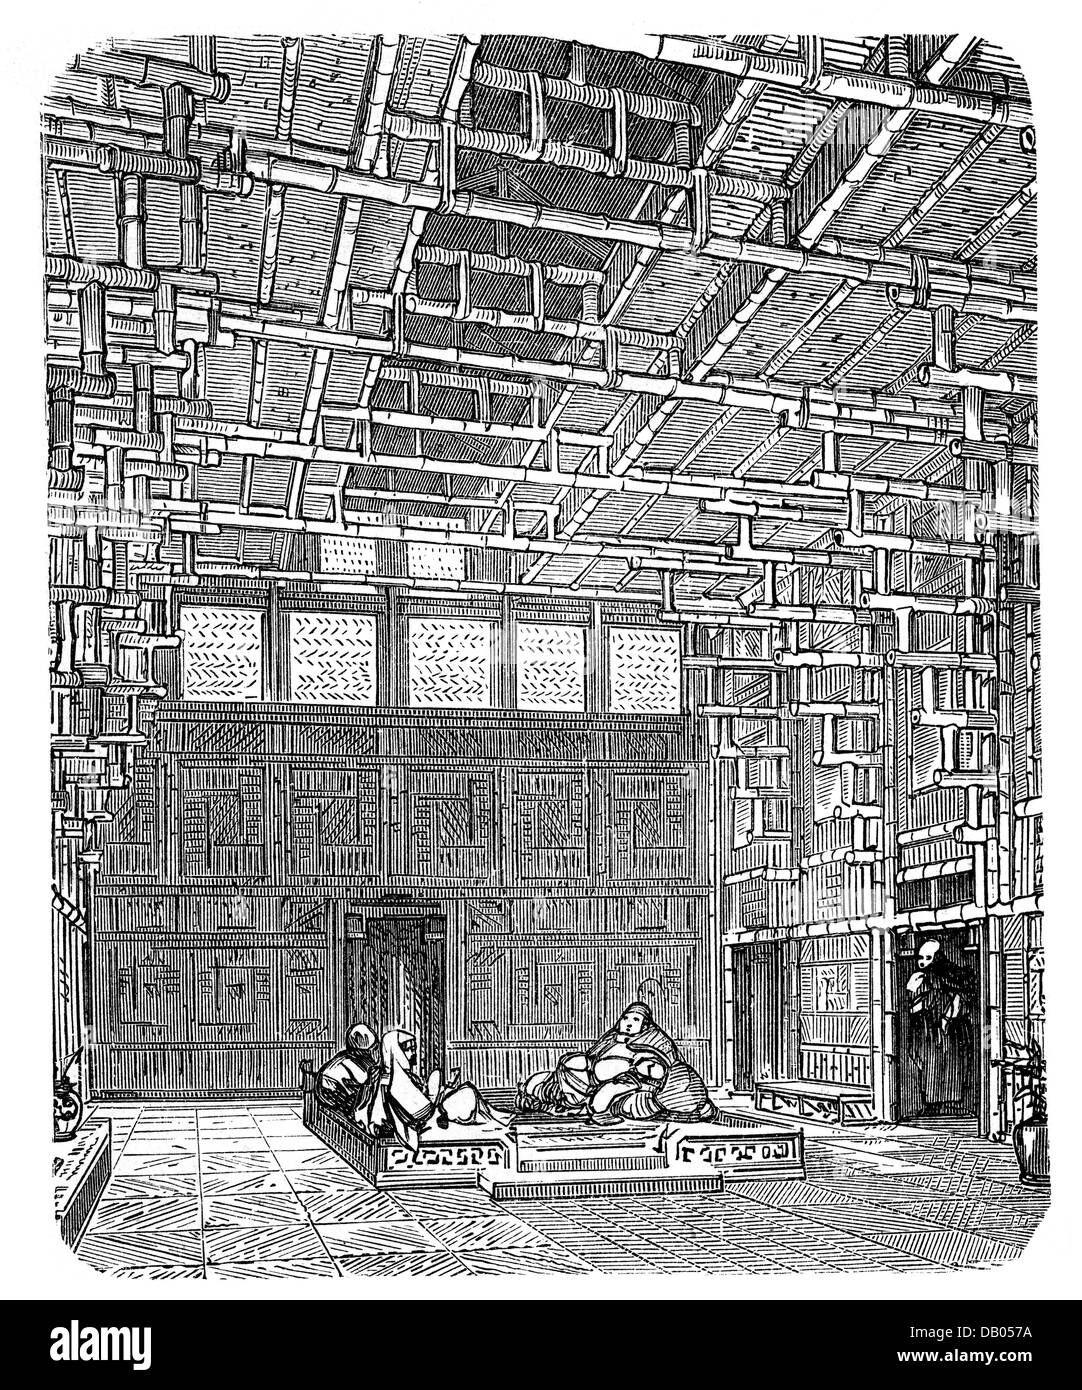 architecture, building, Chinese house made of bamboo, interior view, wood engraving after drawing by Eugene Viollet-le-Duc, late 19th century, bamboo, Asia, Asian, Asiatic, China, home, dwelling, homes, dwellings, residential house, residential houses, architectural design, architectural style, architectural styles, historic, historical, Viollet le Duc, people, Additional-Rights-Clearences-Not Available Stock Photo